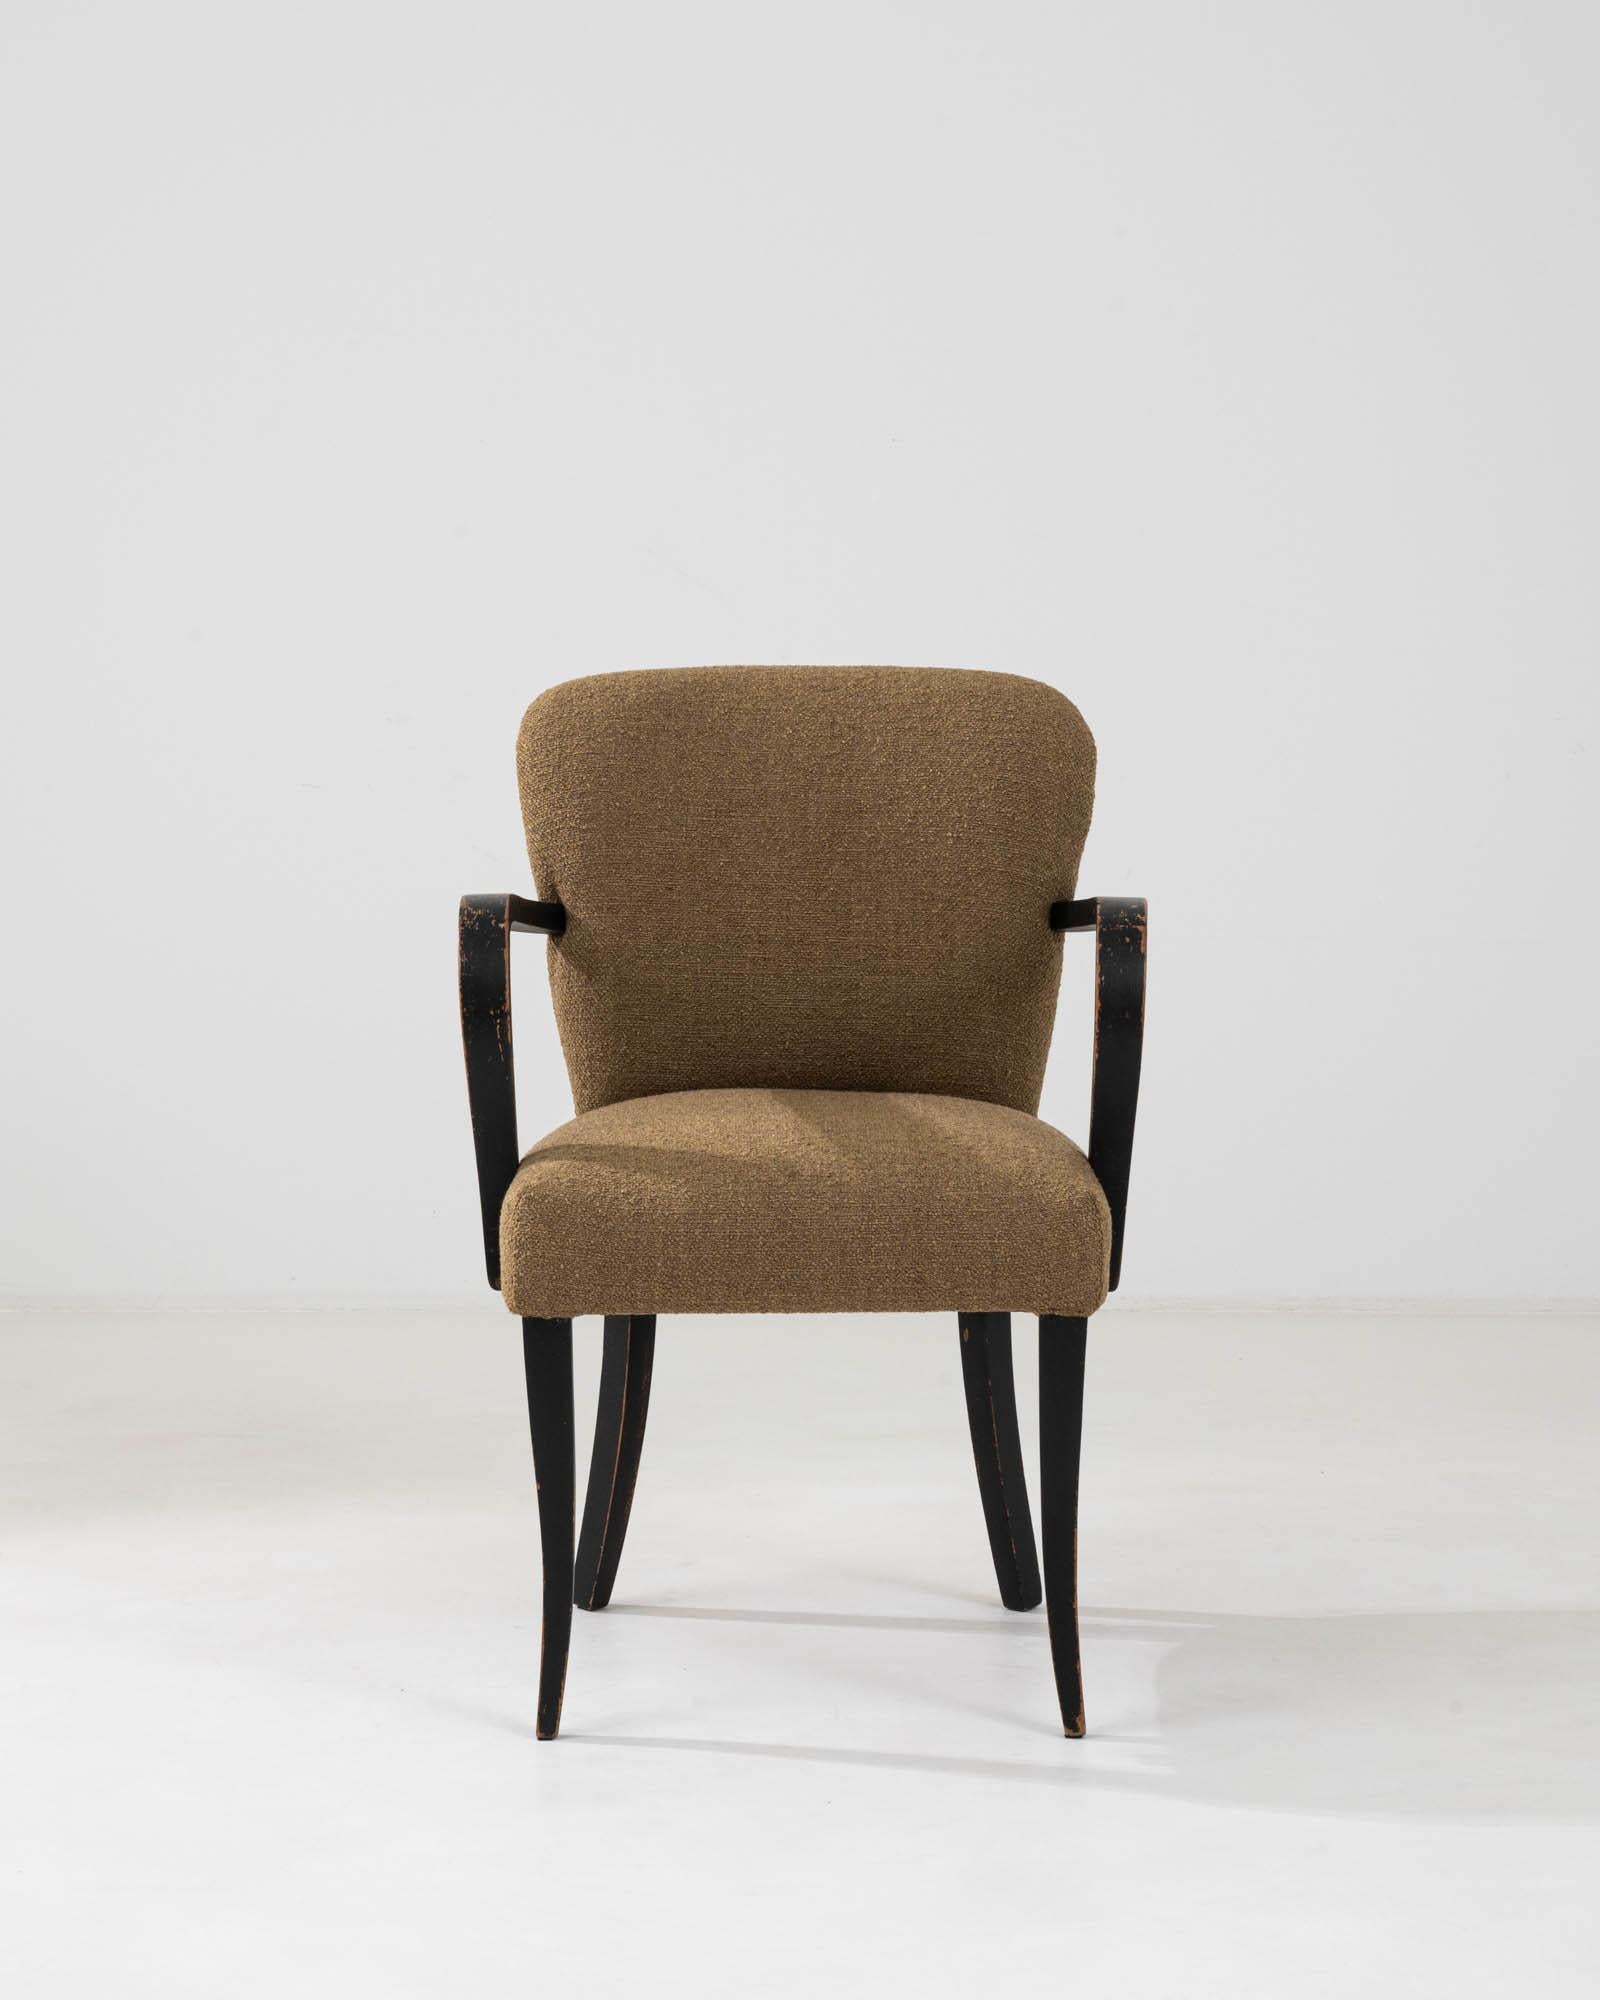 This 20th Century Central European Upholstered Armchair offers a distinctive blend of comfort and vintage style. Upholstered in a durable, earthy brown fabric, it provides a neutral yet elegant palette that complements any interior. The chair